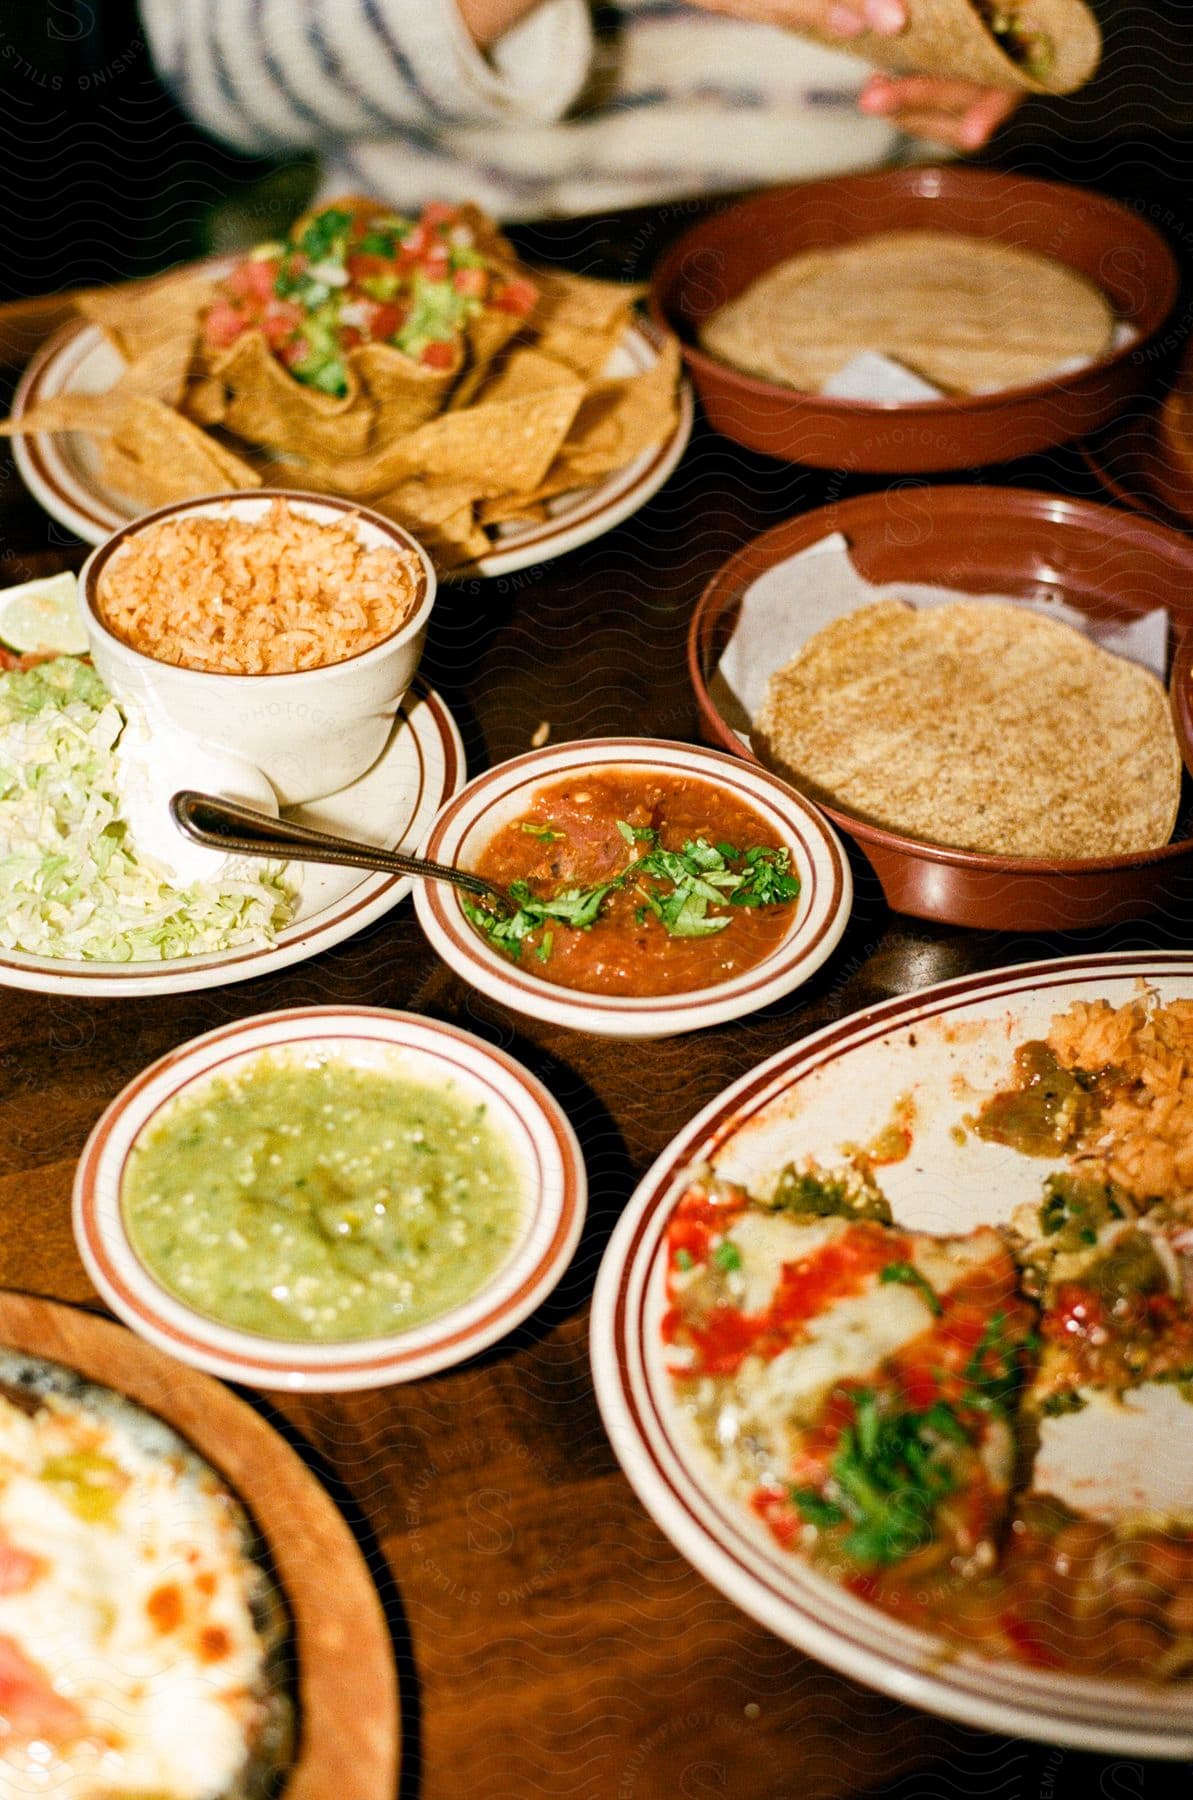 Plates and bowls of Mexican food fill a table as someone sits in the distance